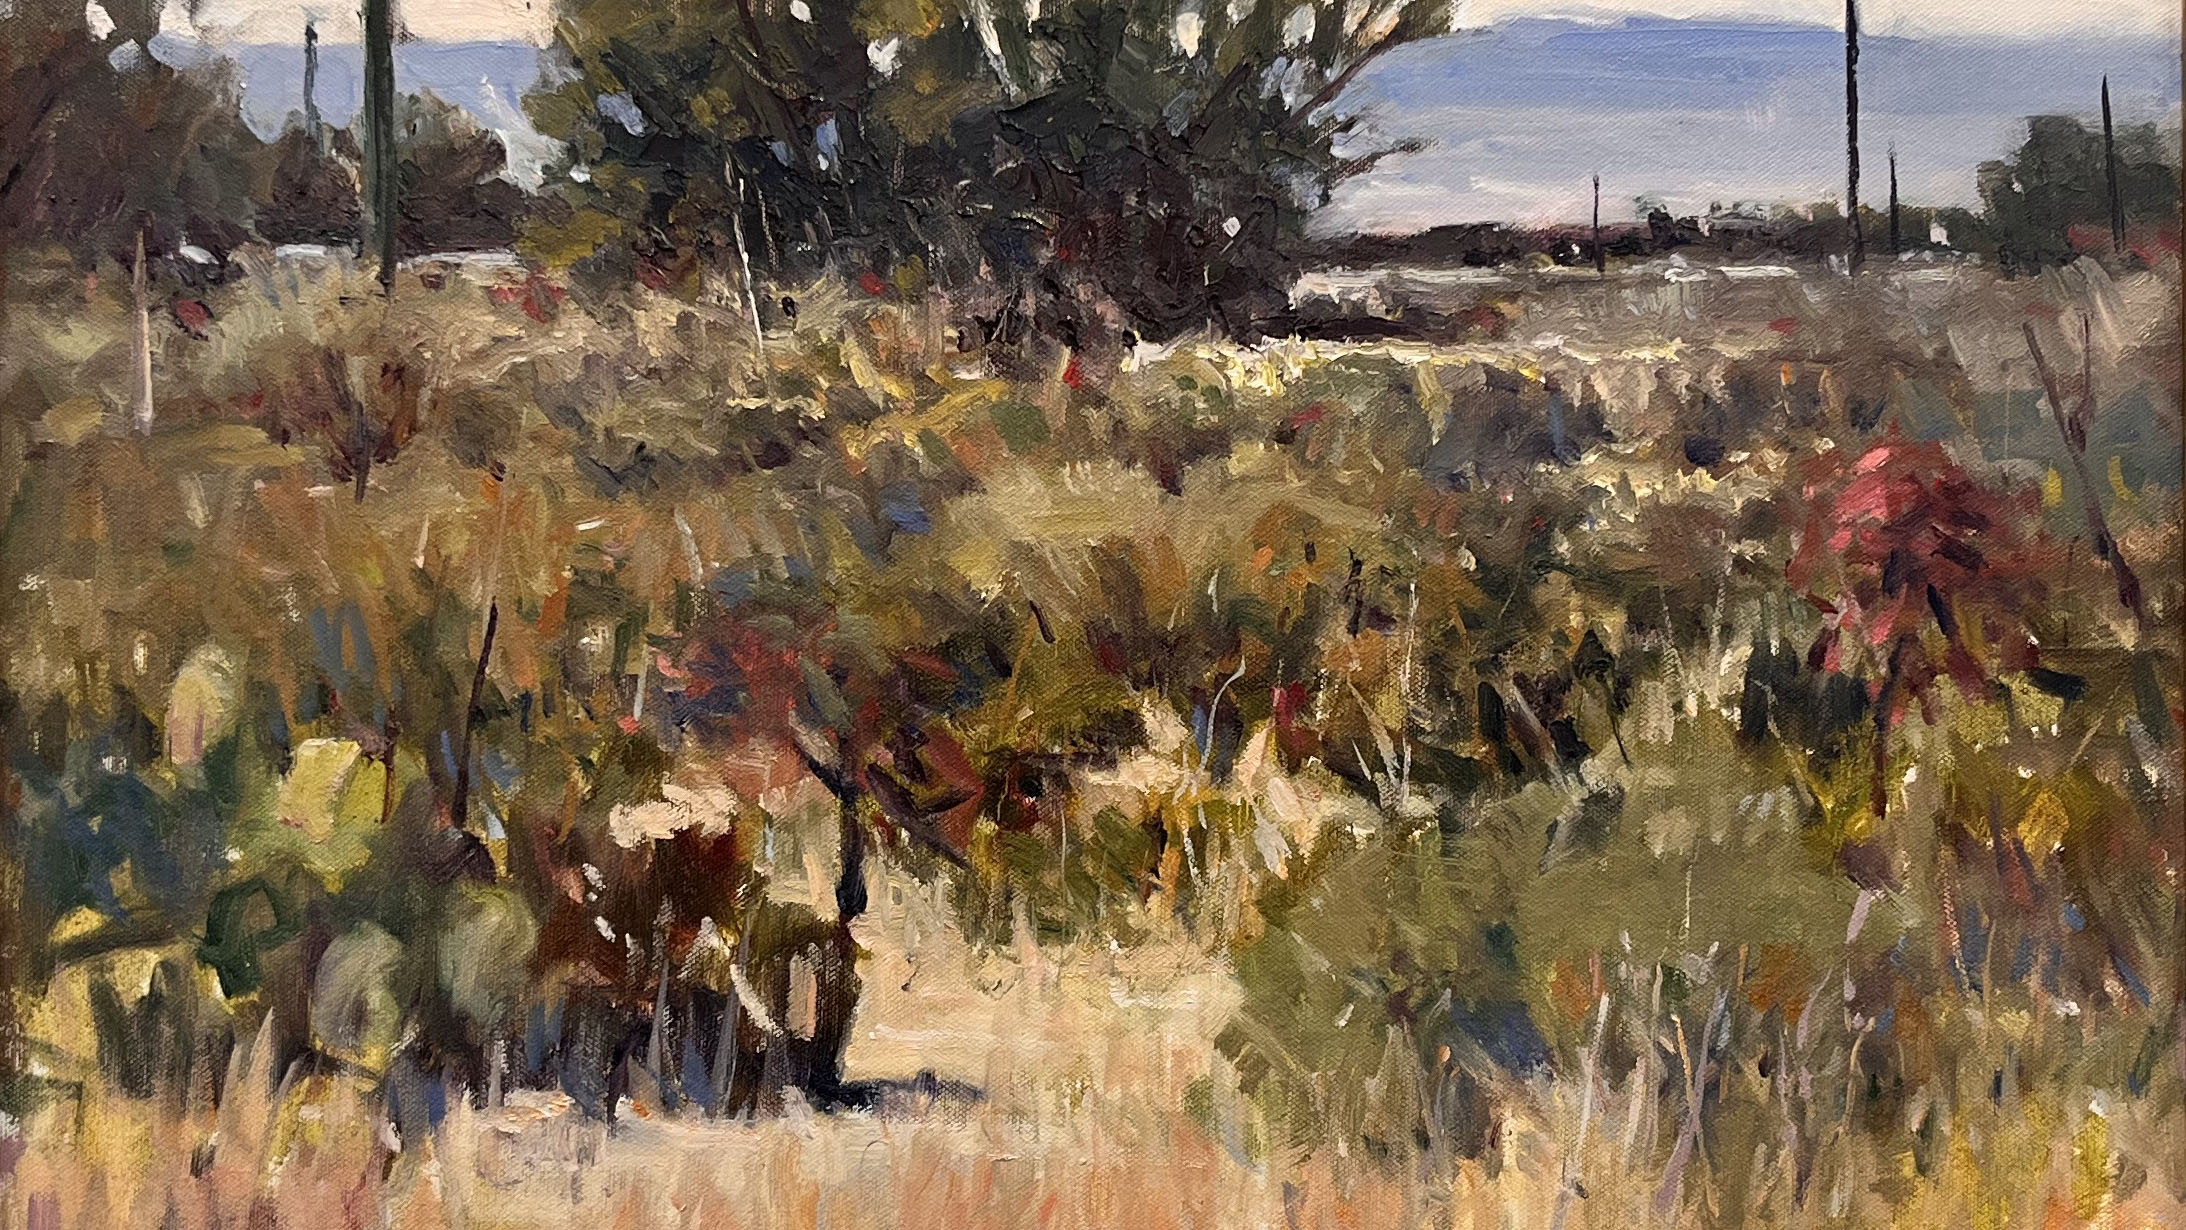 Desert Morning by Joe Orr displayed at the "Painting In, Painting Out" exhibit. The exhibit will be on display through October 12. 